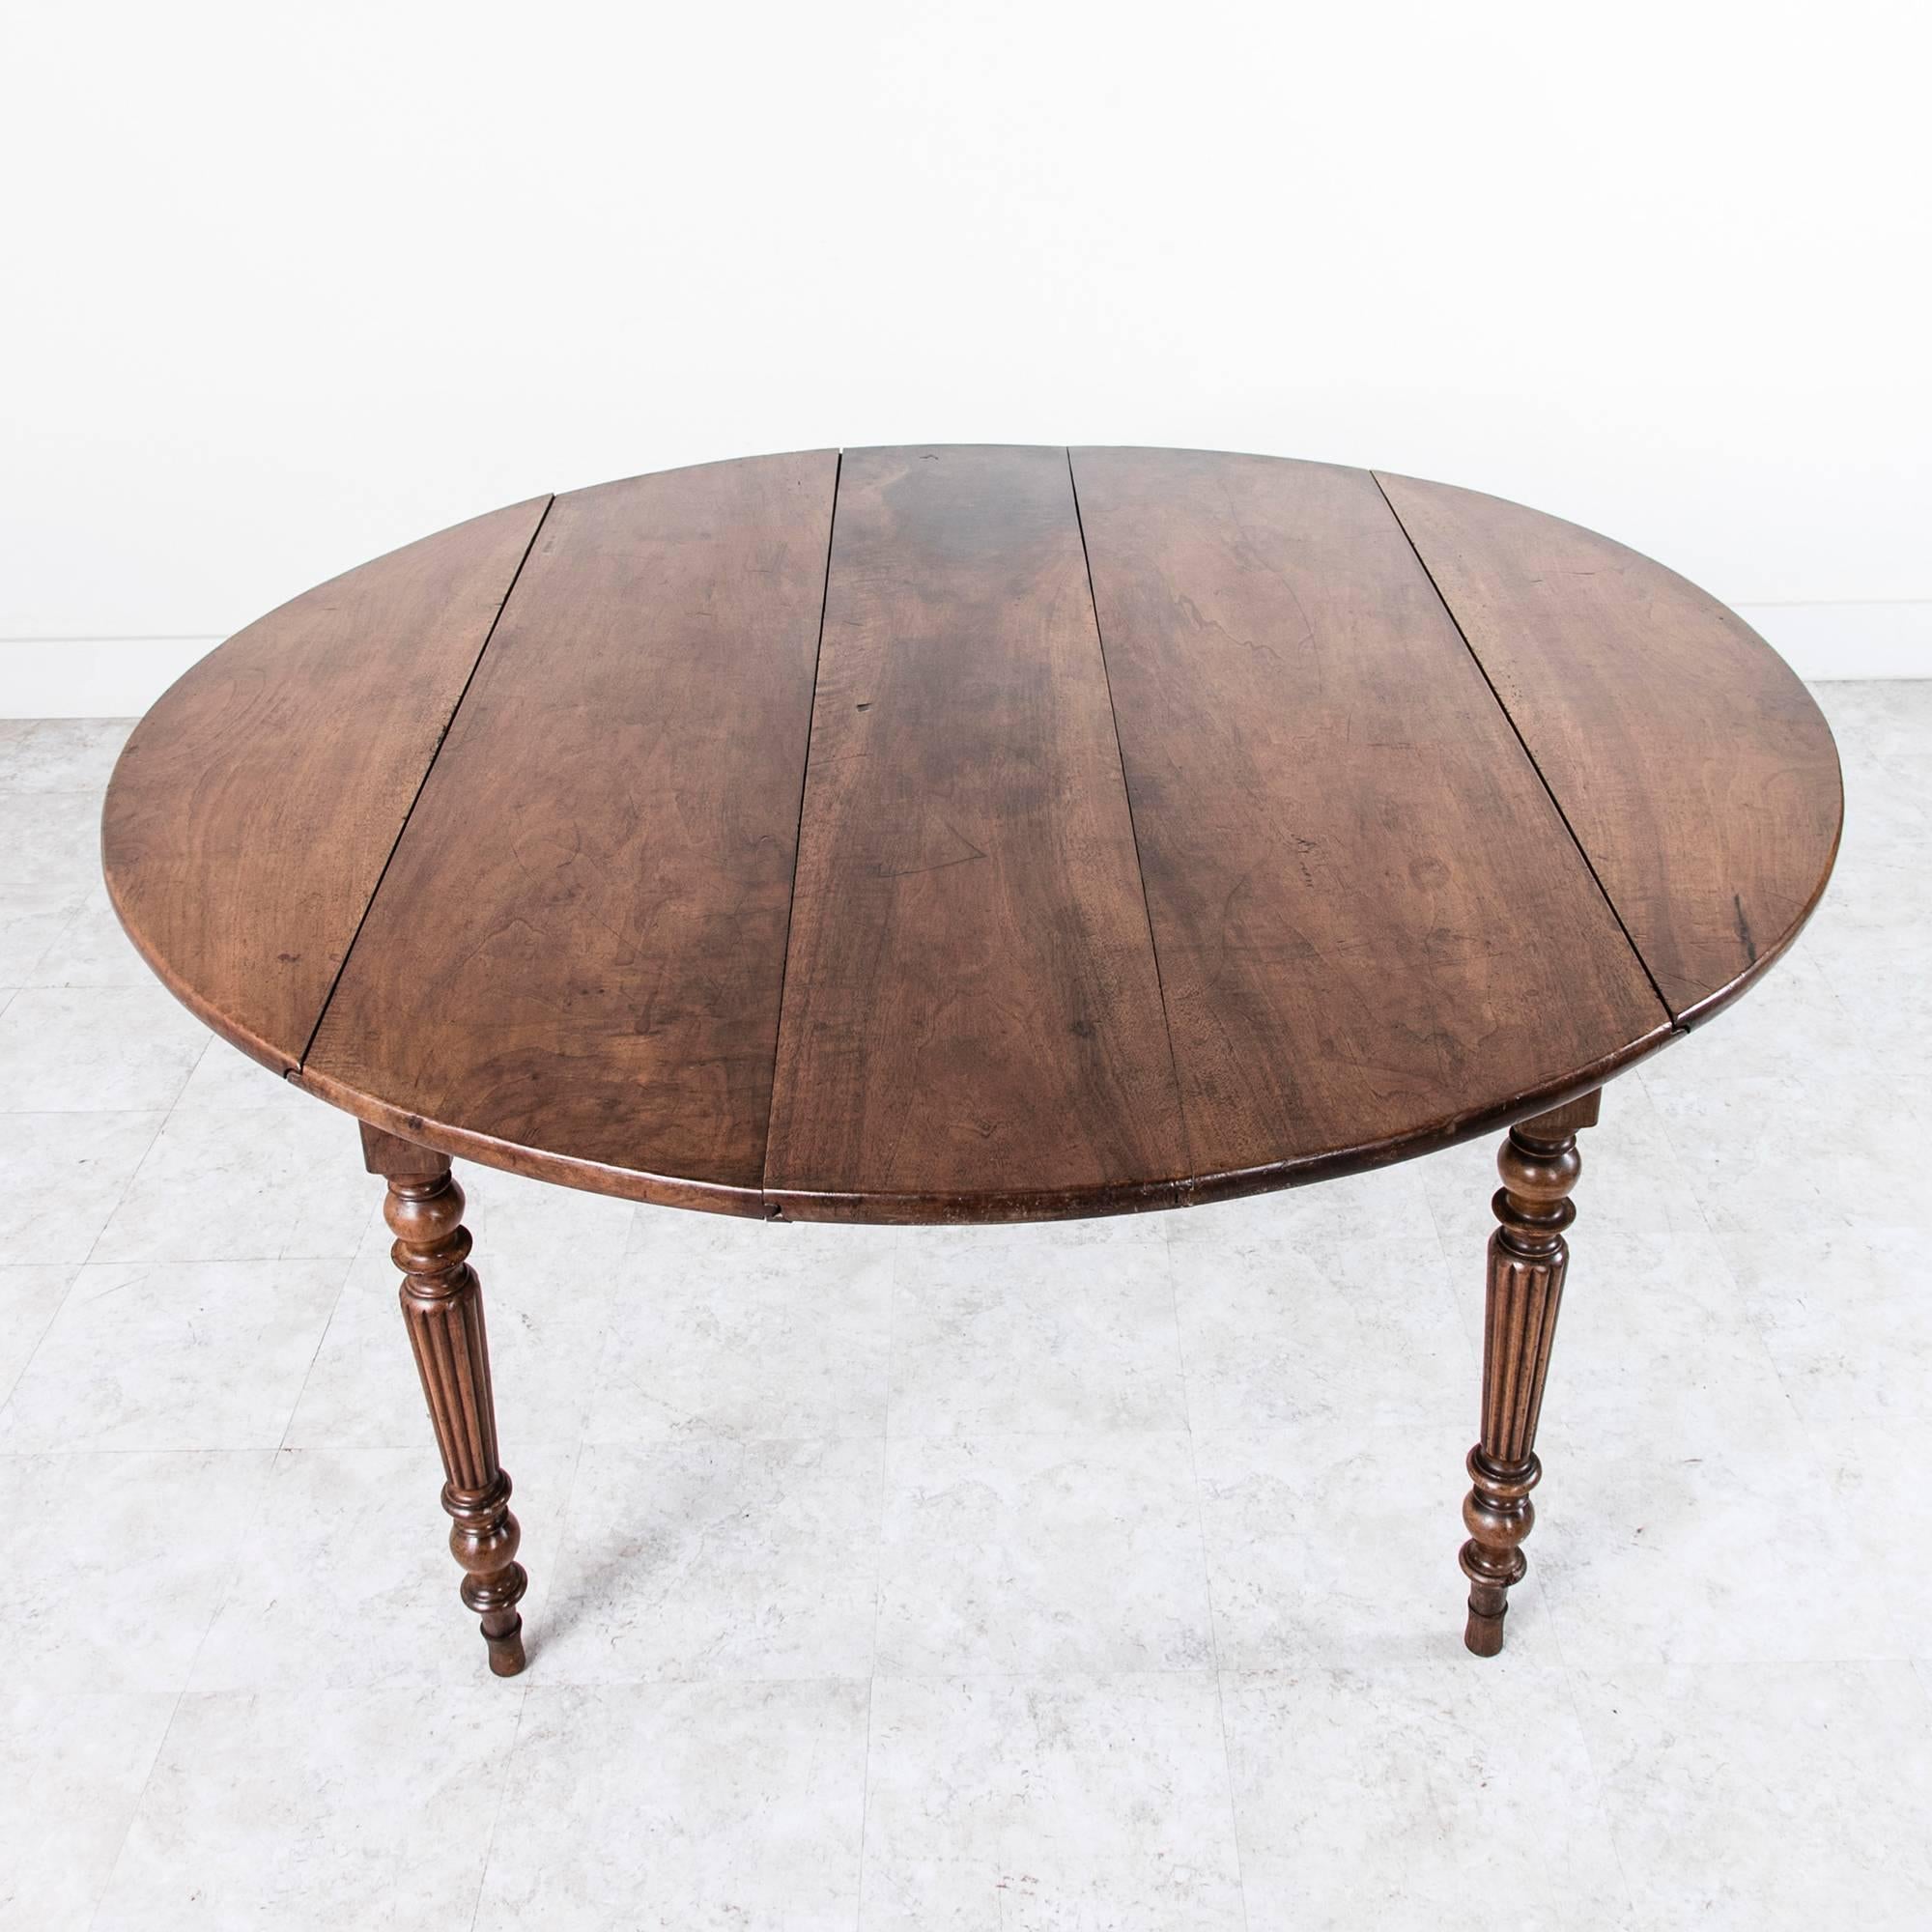 19th Century Period Louis Philippe Solid Walnut Round Dining Table with Turned Fluted Legs